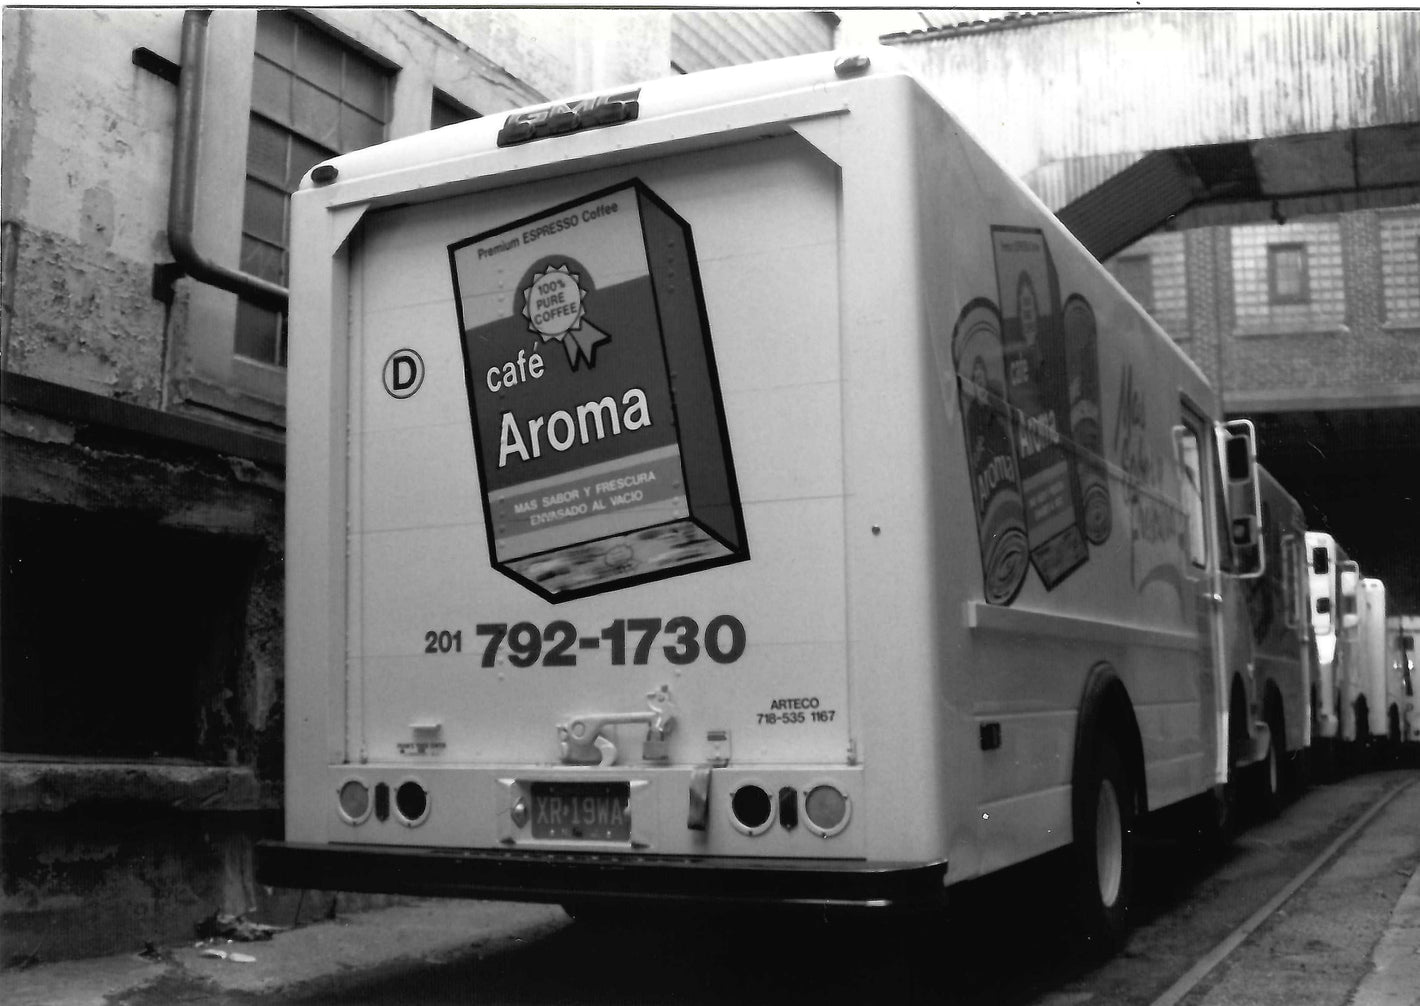 A white truck with images of Cafe Aroma coffee